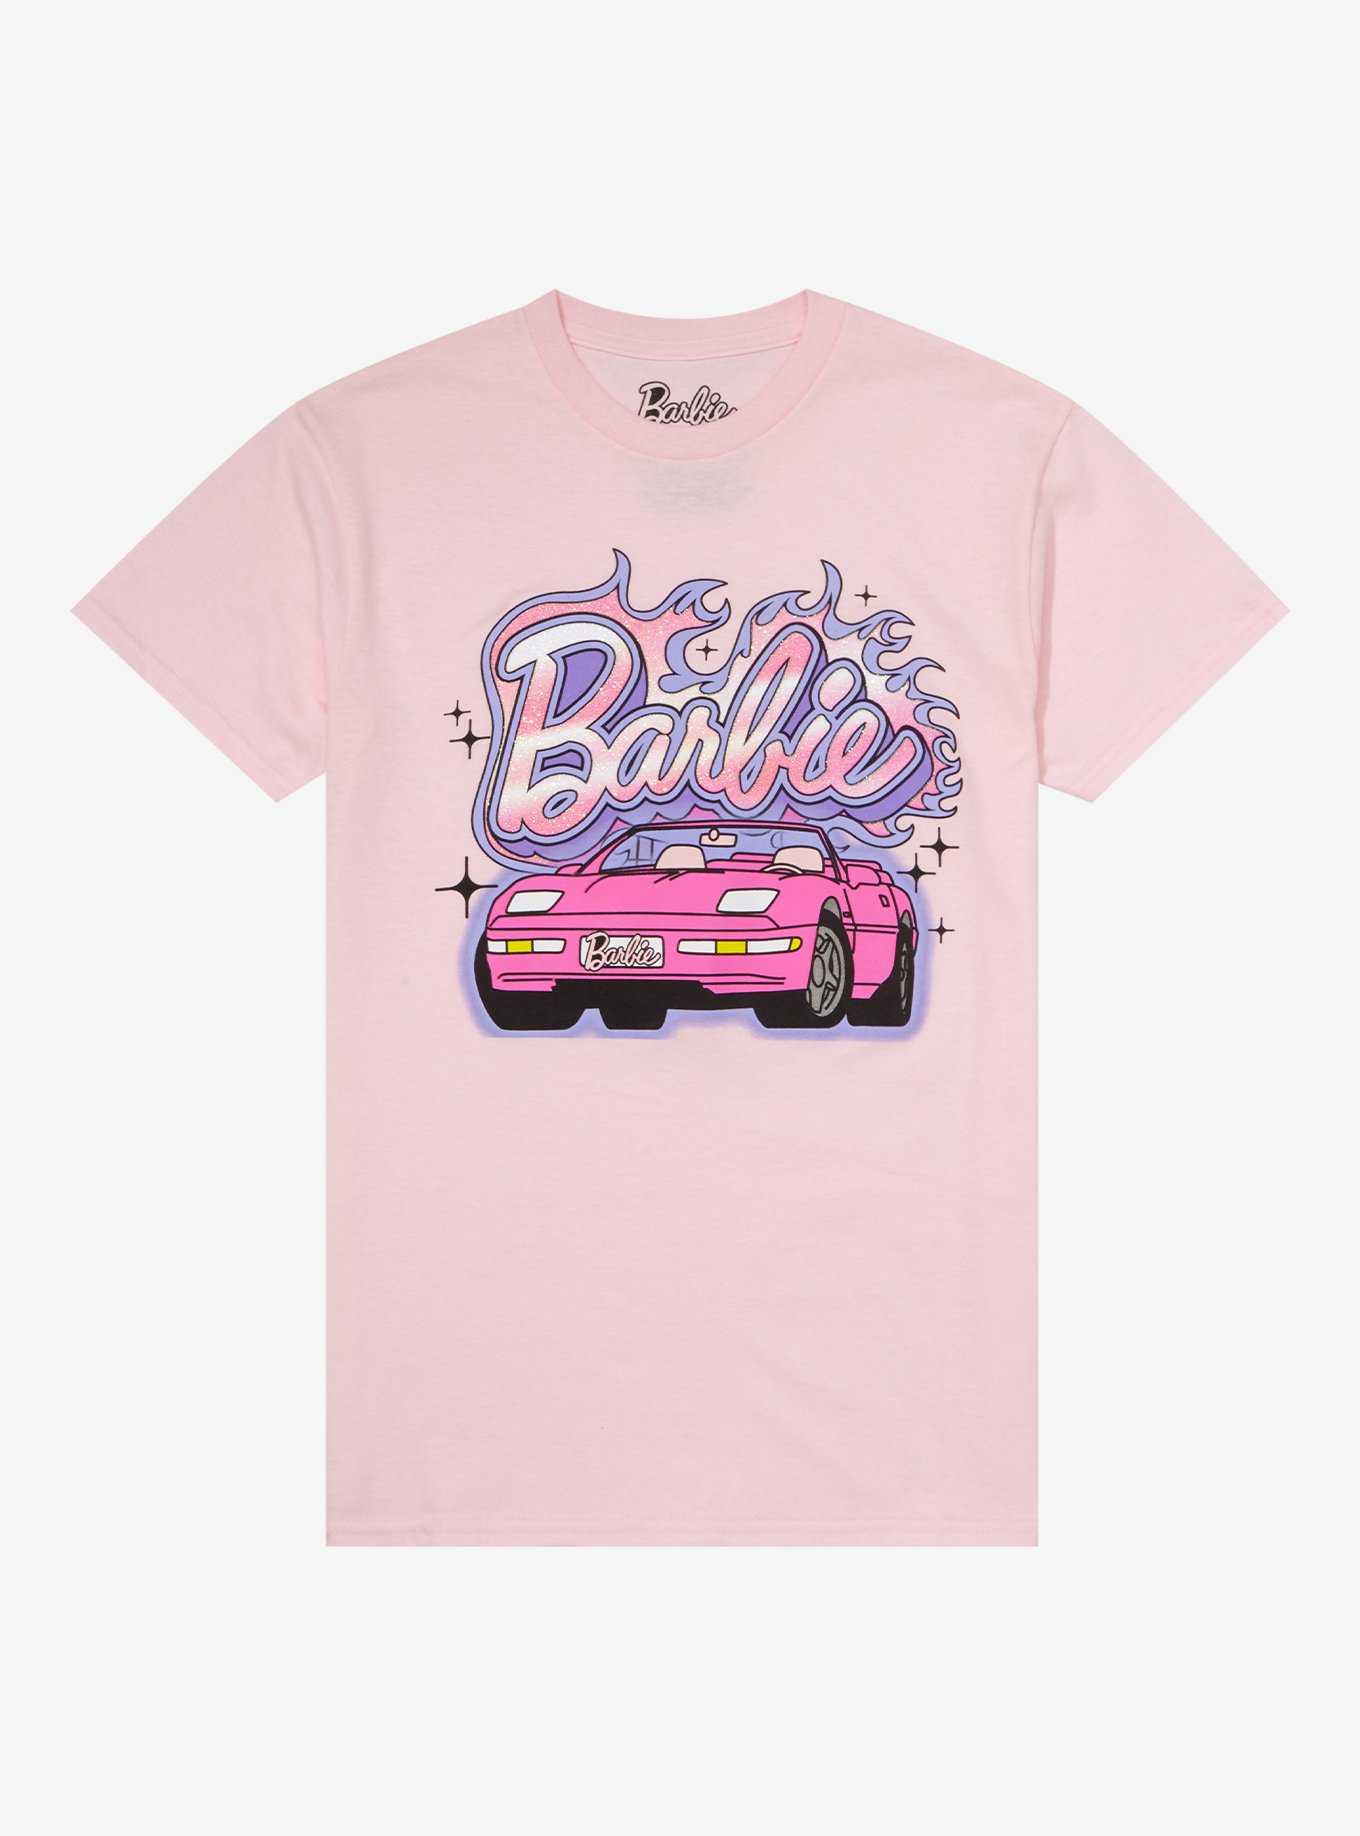 OFFICIAL Barbie Shirts & Topic Hot Merch 